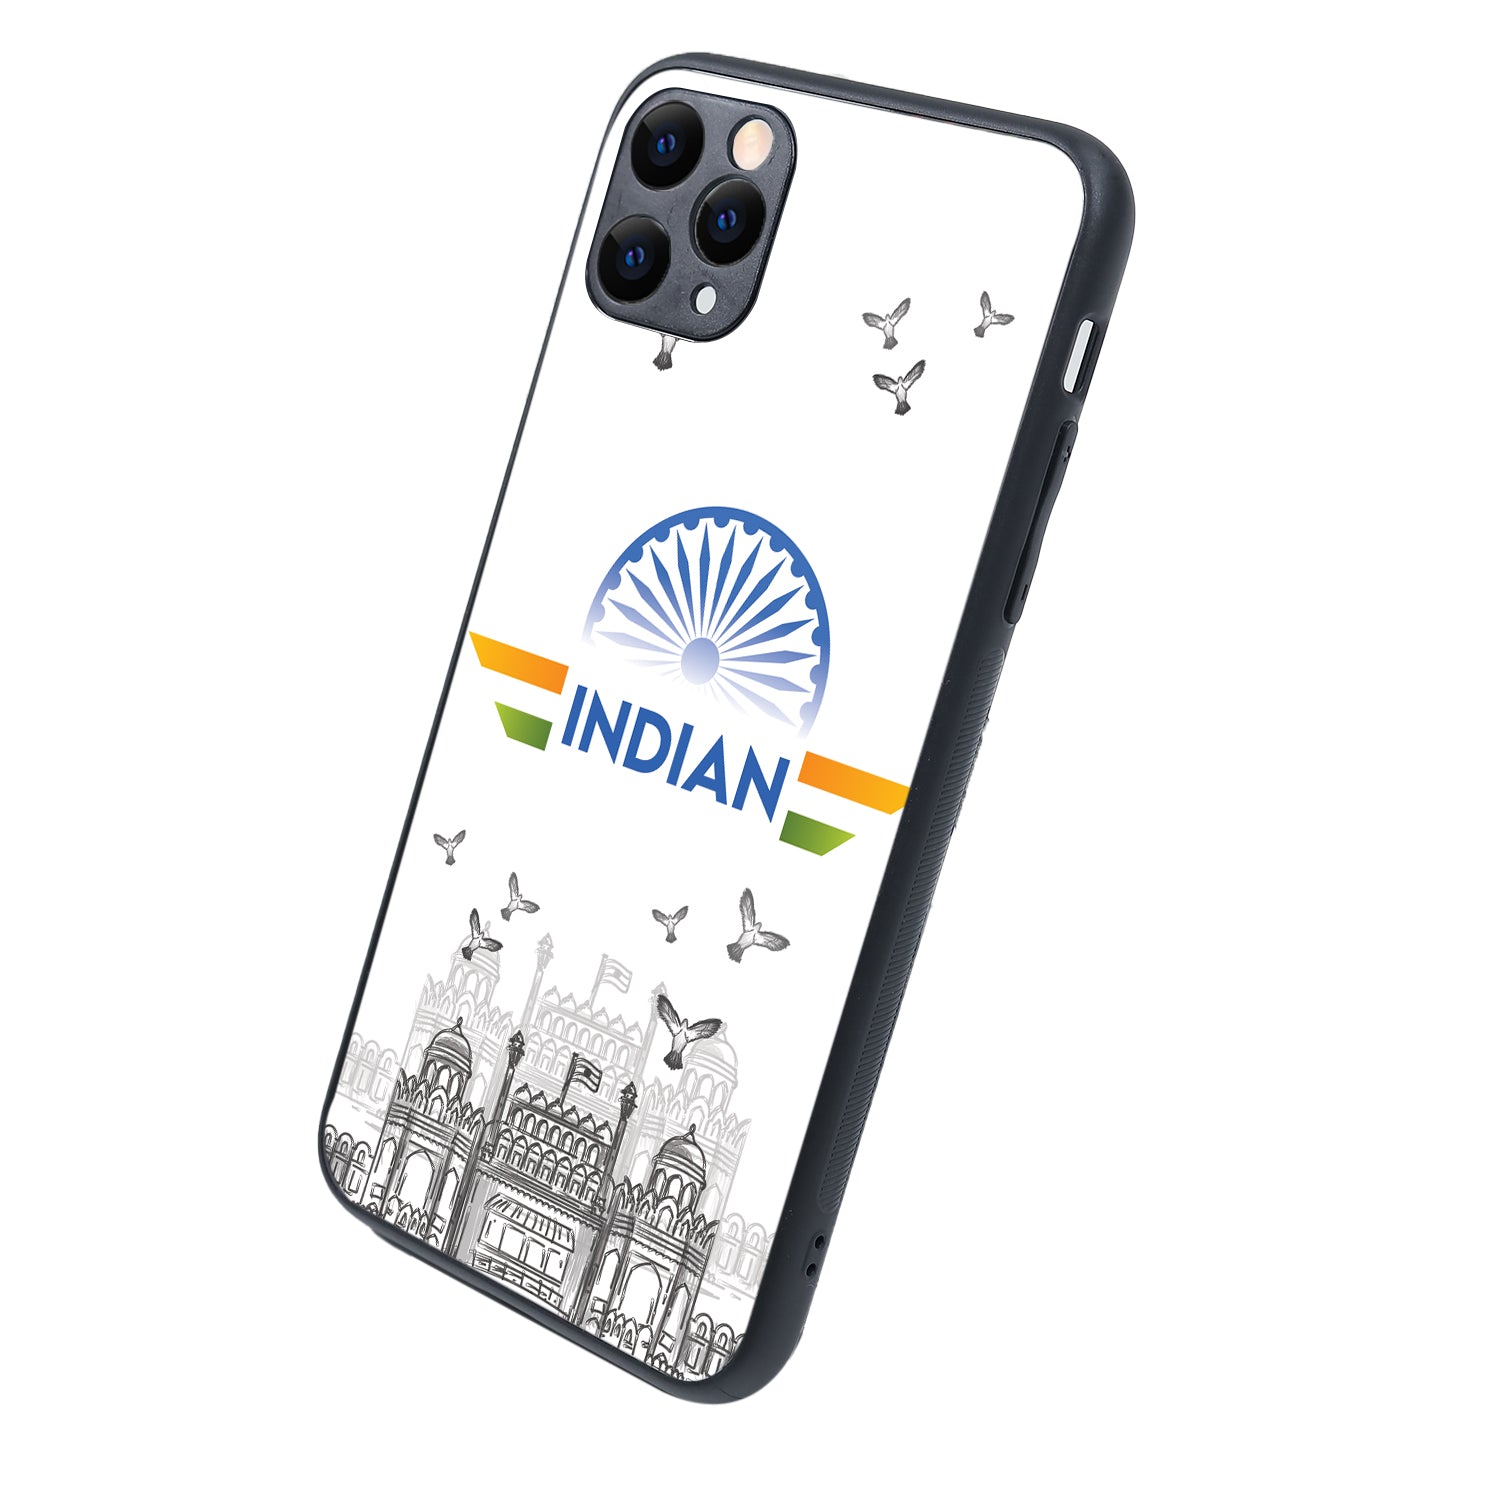 Indian iPhone 11 Pro Max Case